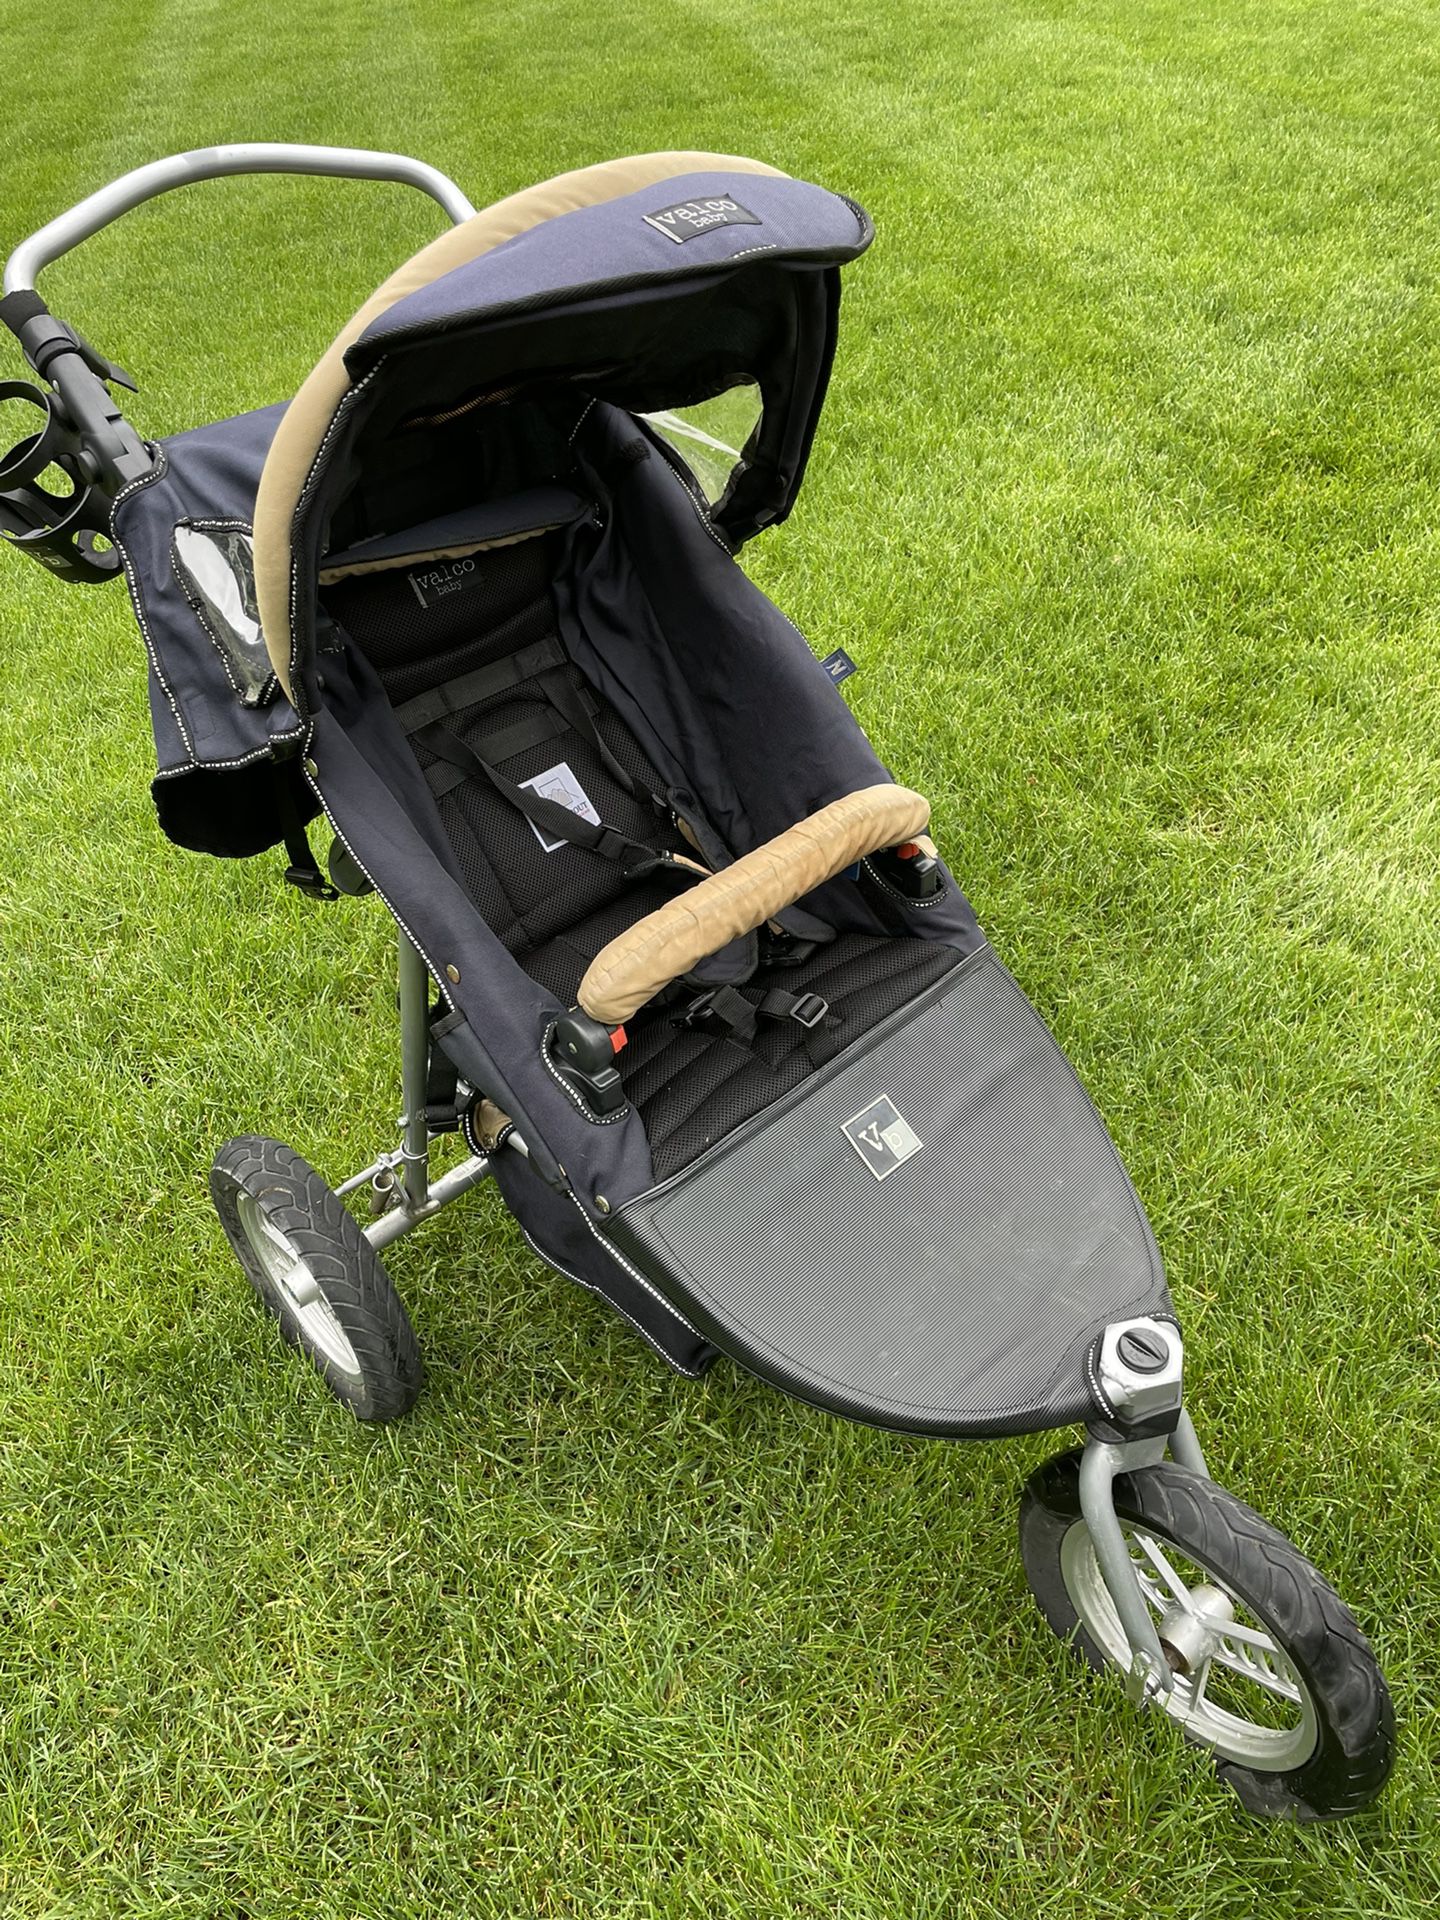 Valco Baby Single Jogging Stroller With Bassinet For Sale In Sudbury Ma Offerup